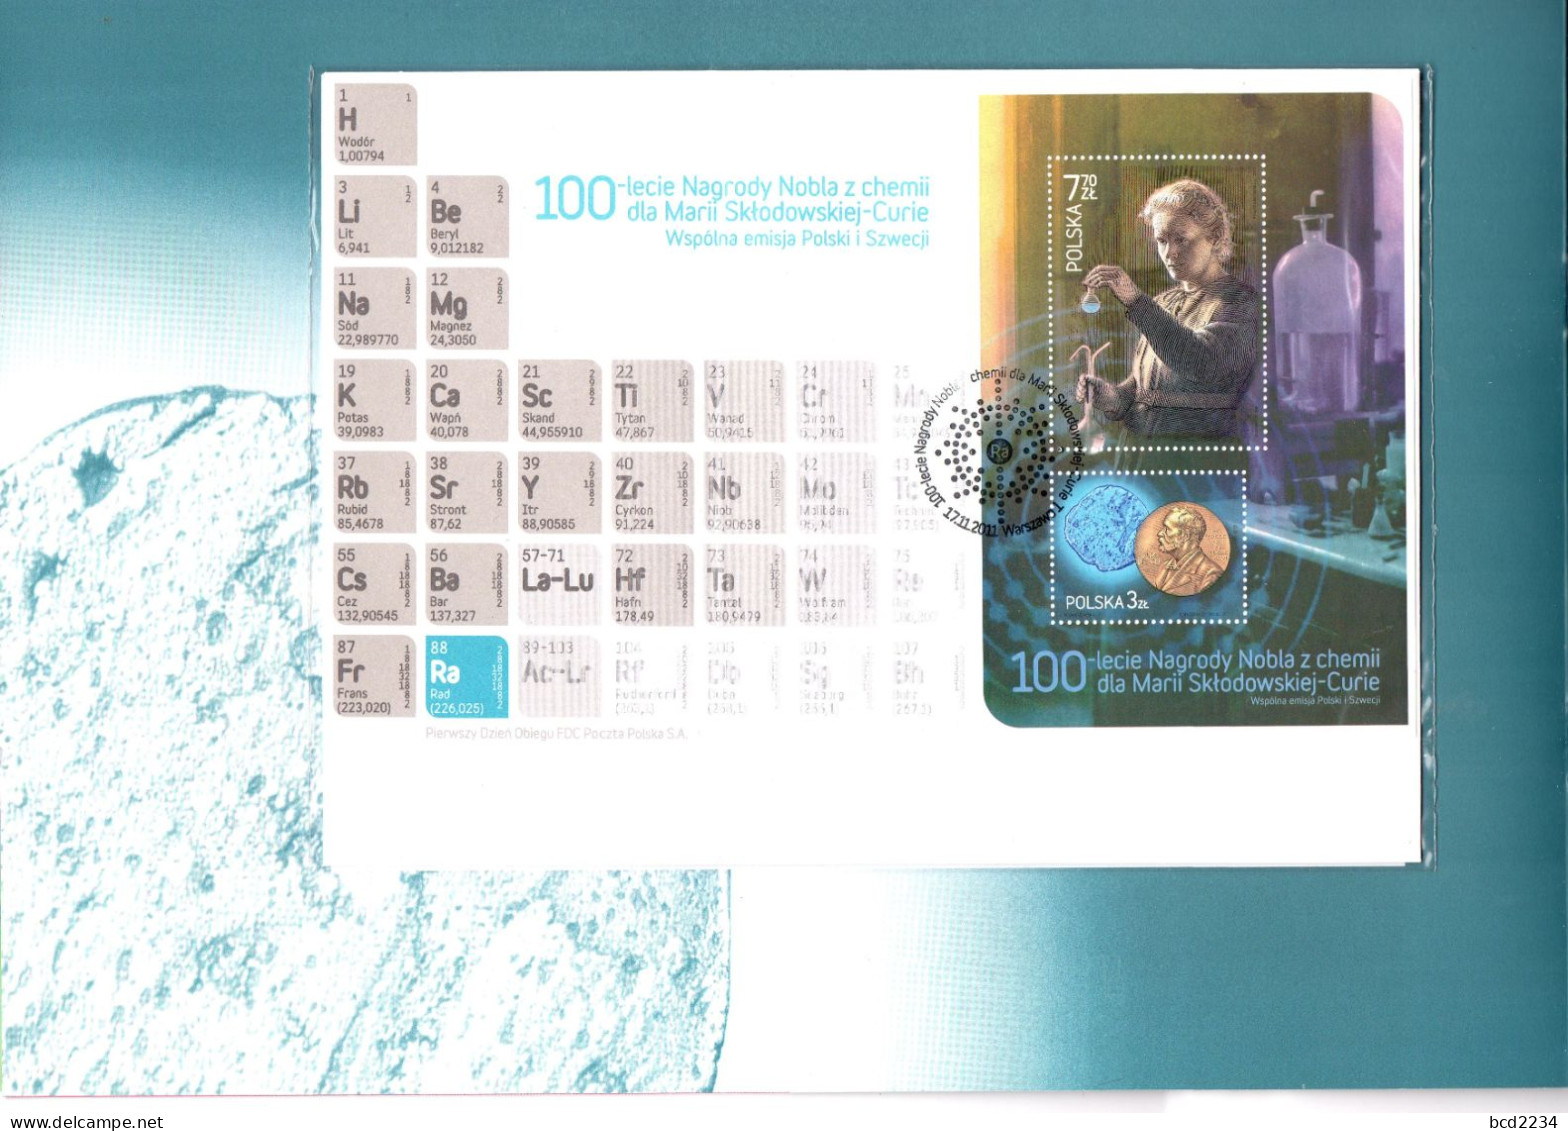 POLAND 2011 LIMITED EDITION: RARE 100TH ANNIVERSARY MARIE CURIE NOBEL PRIZE CHEMISTRY FOLDER FDC MS PL SWEDEN - Chemie